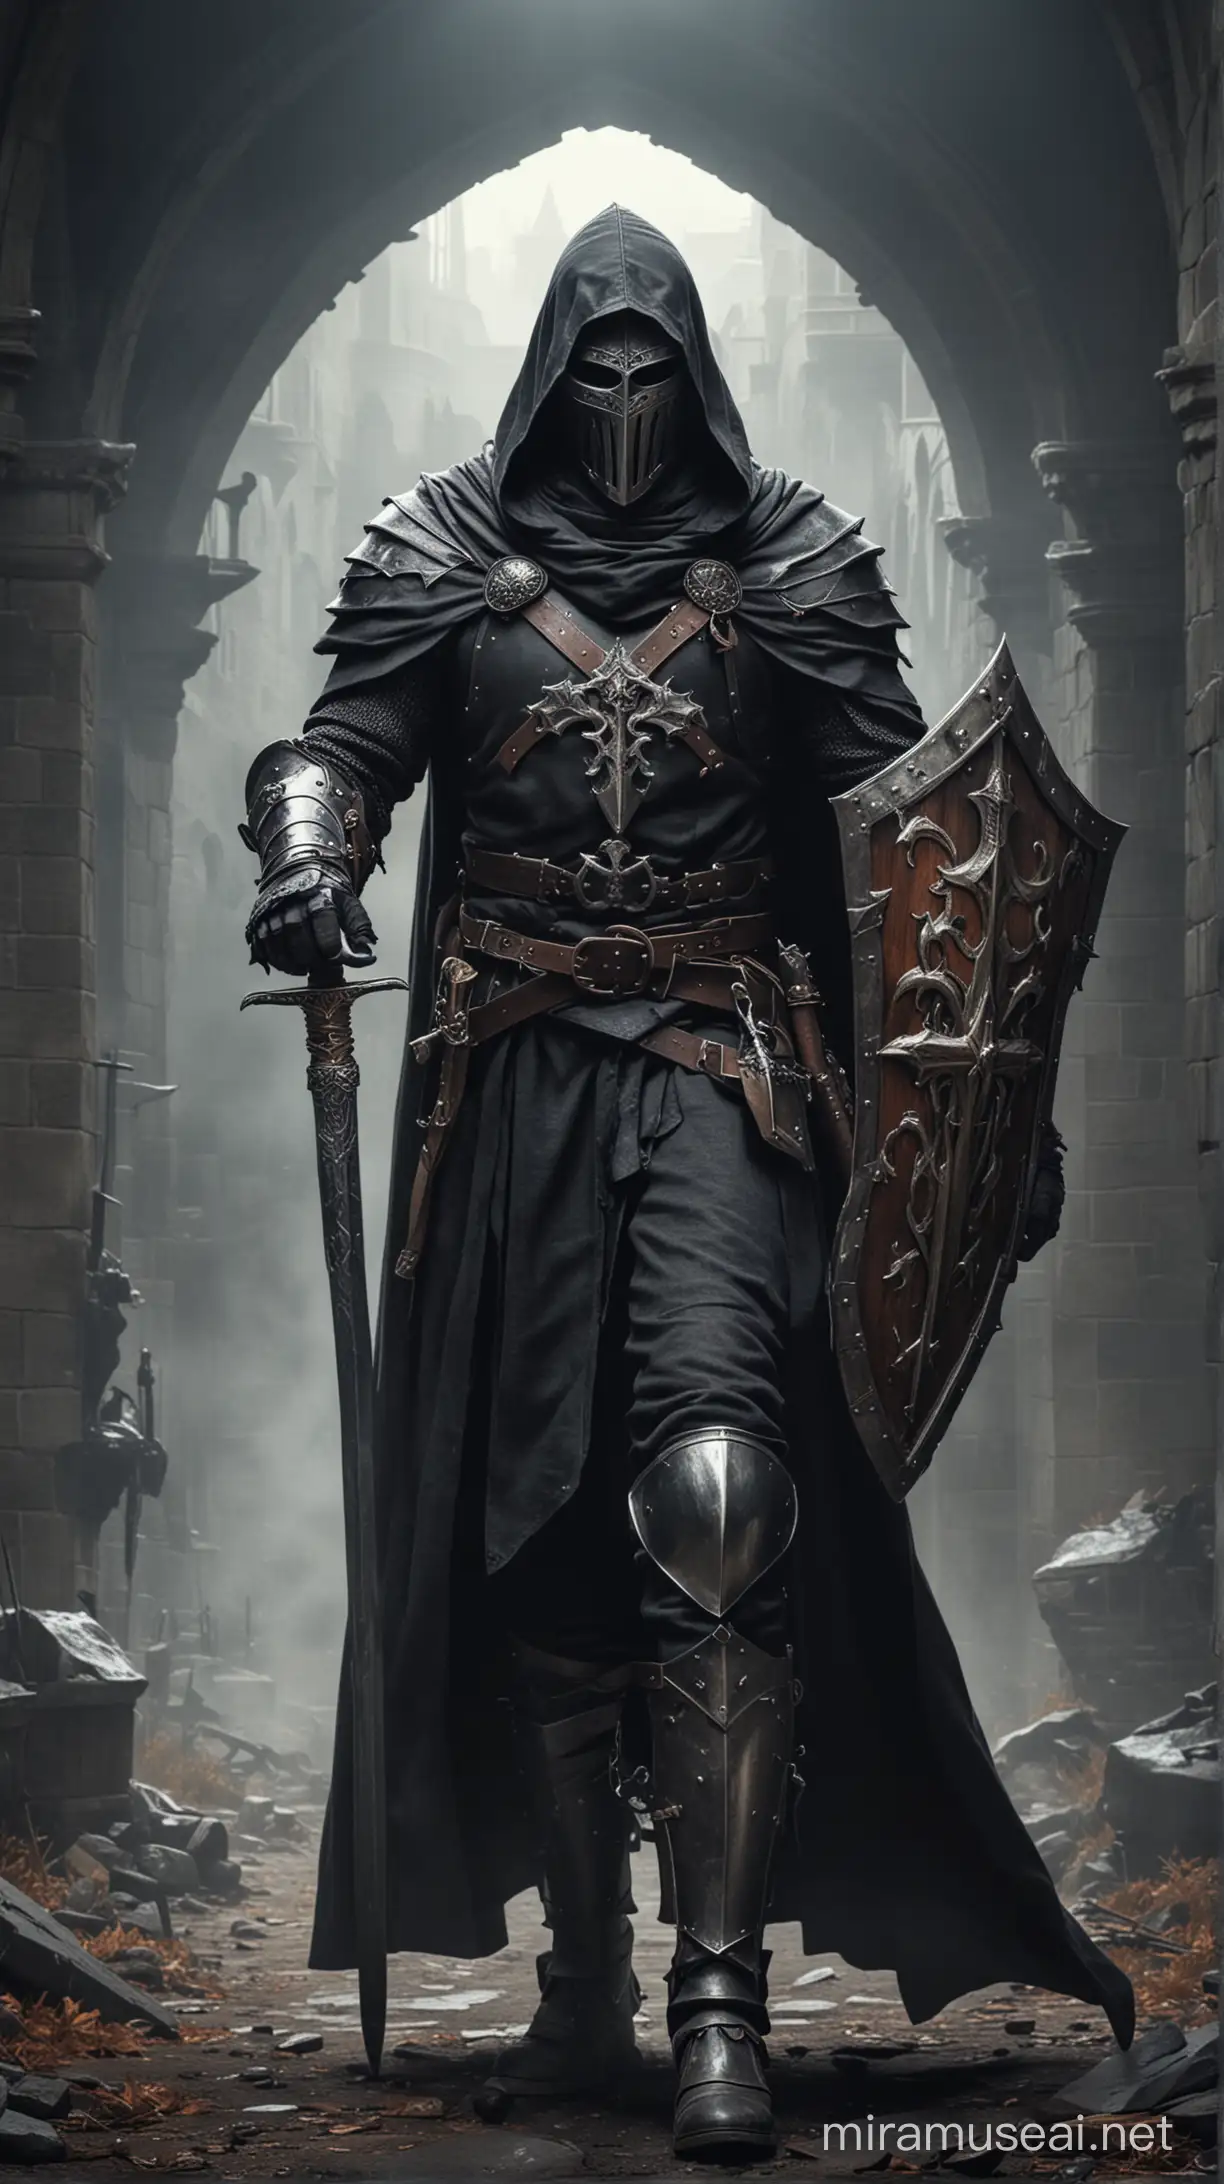 templar, knight, man, epic fantasy, hooded, cloak. tower backdrop. knight mask, holding mace and shield